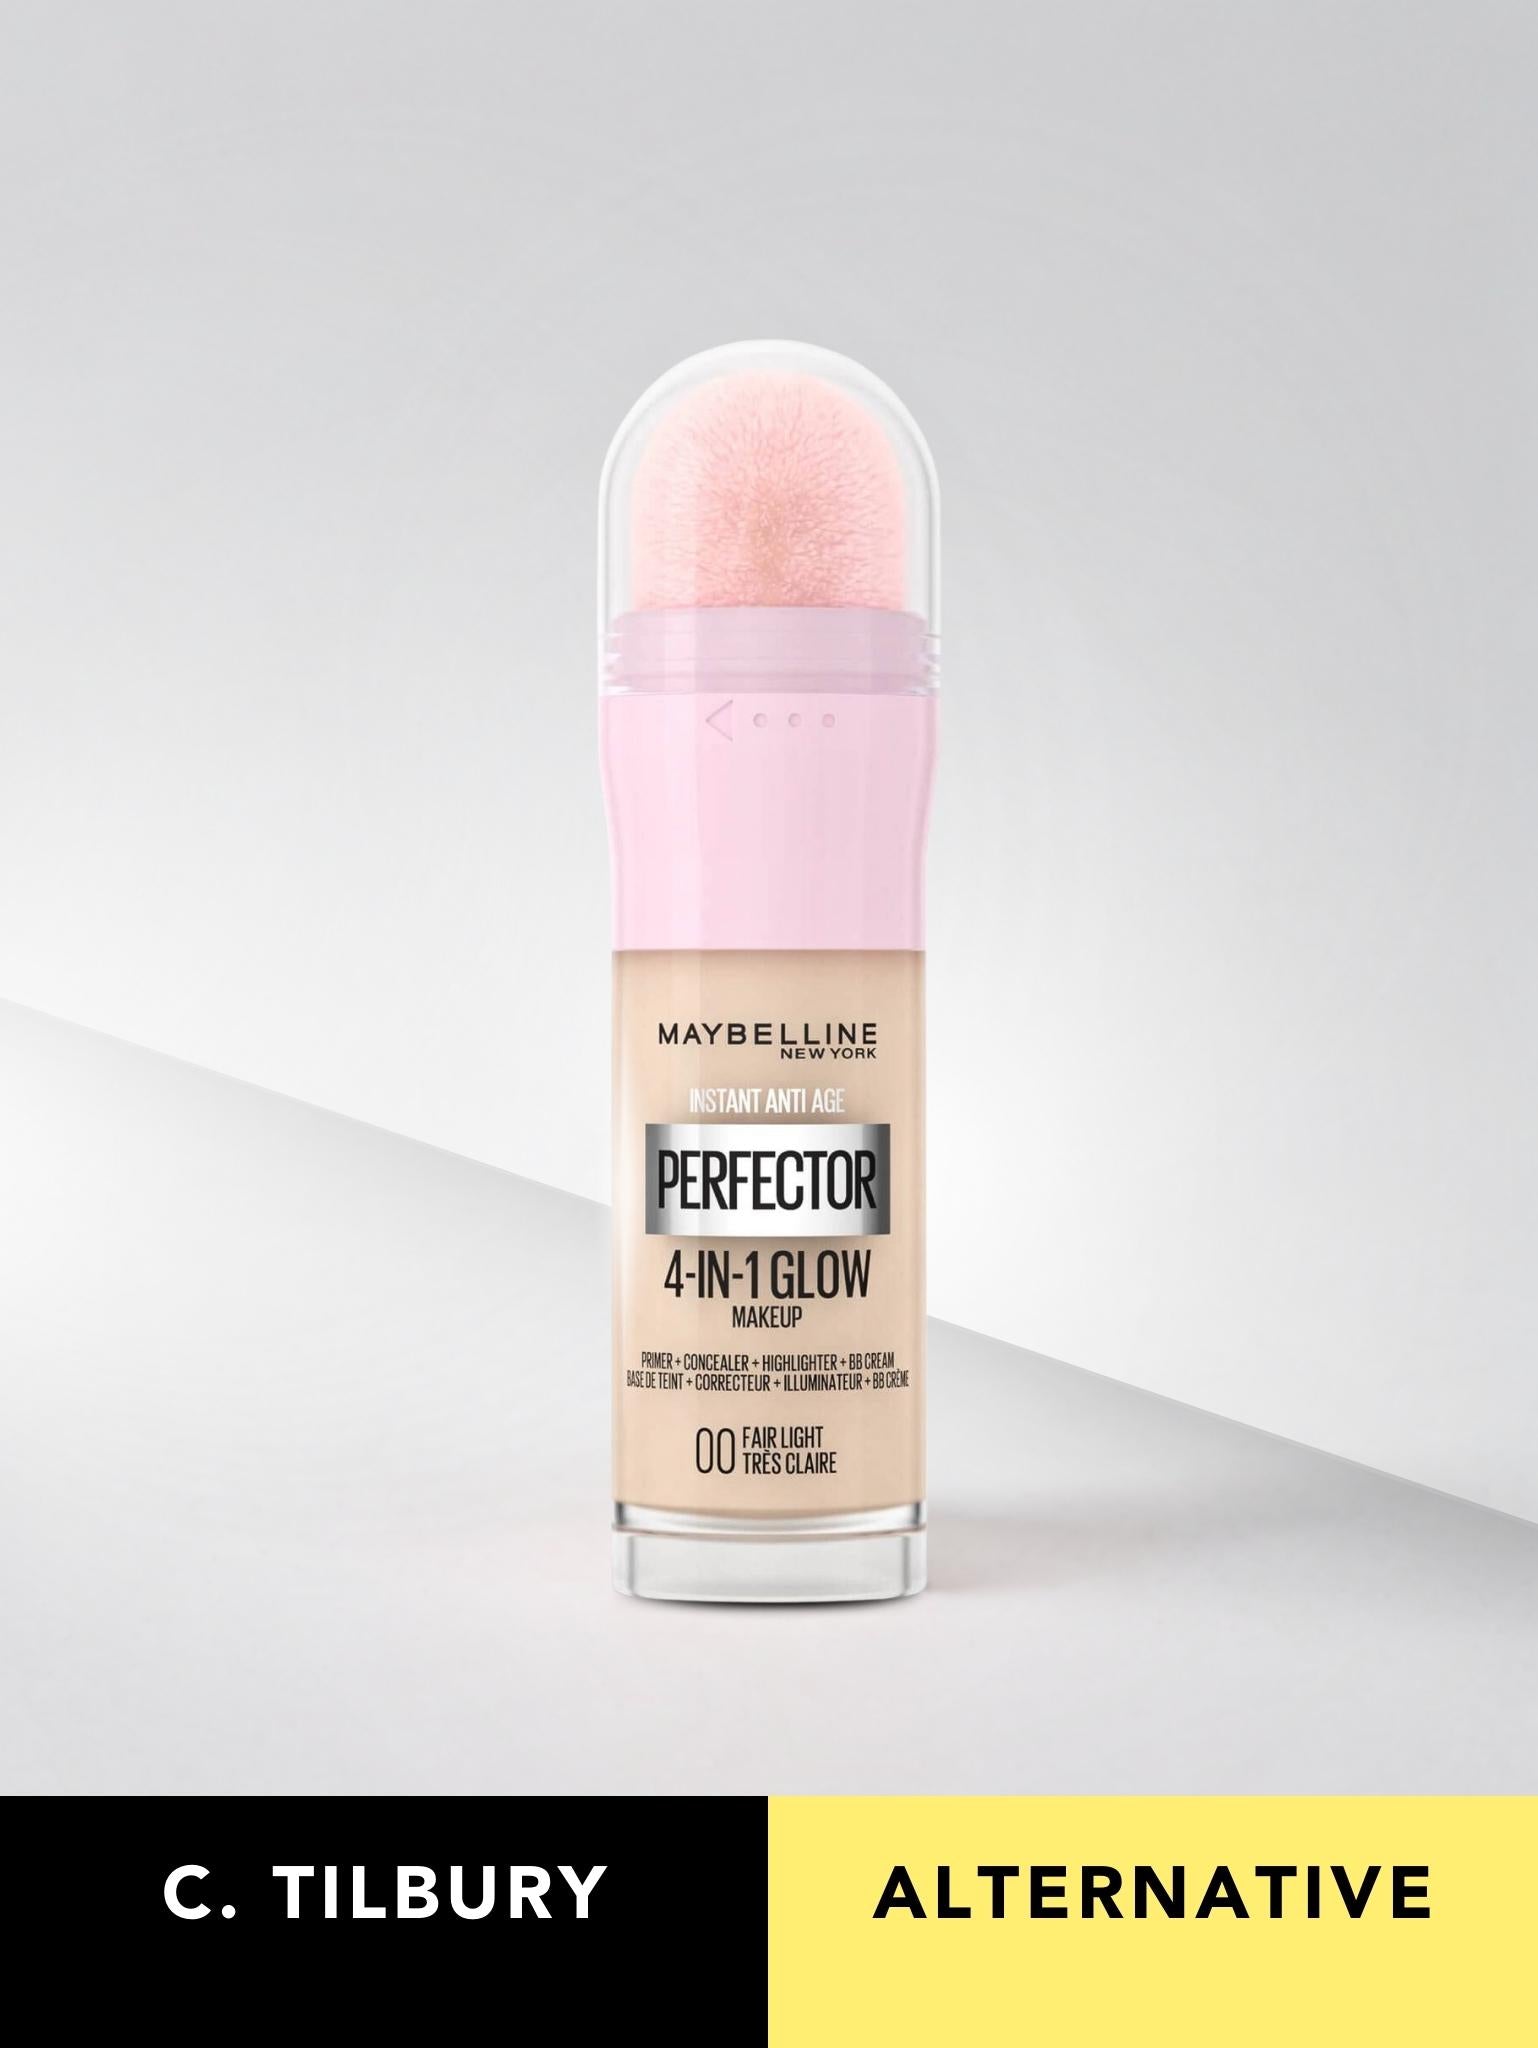 4-in-1: Perfector Age Rewind – Fair Light Dupeshop Maybelline Instant